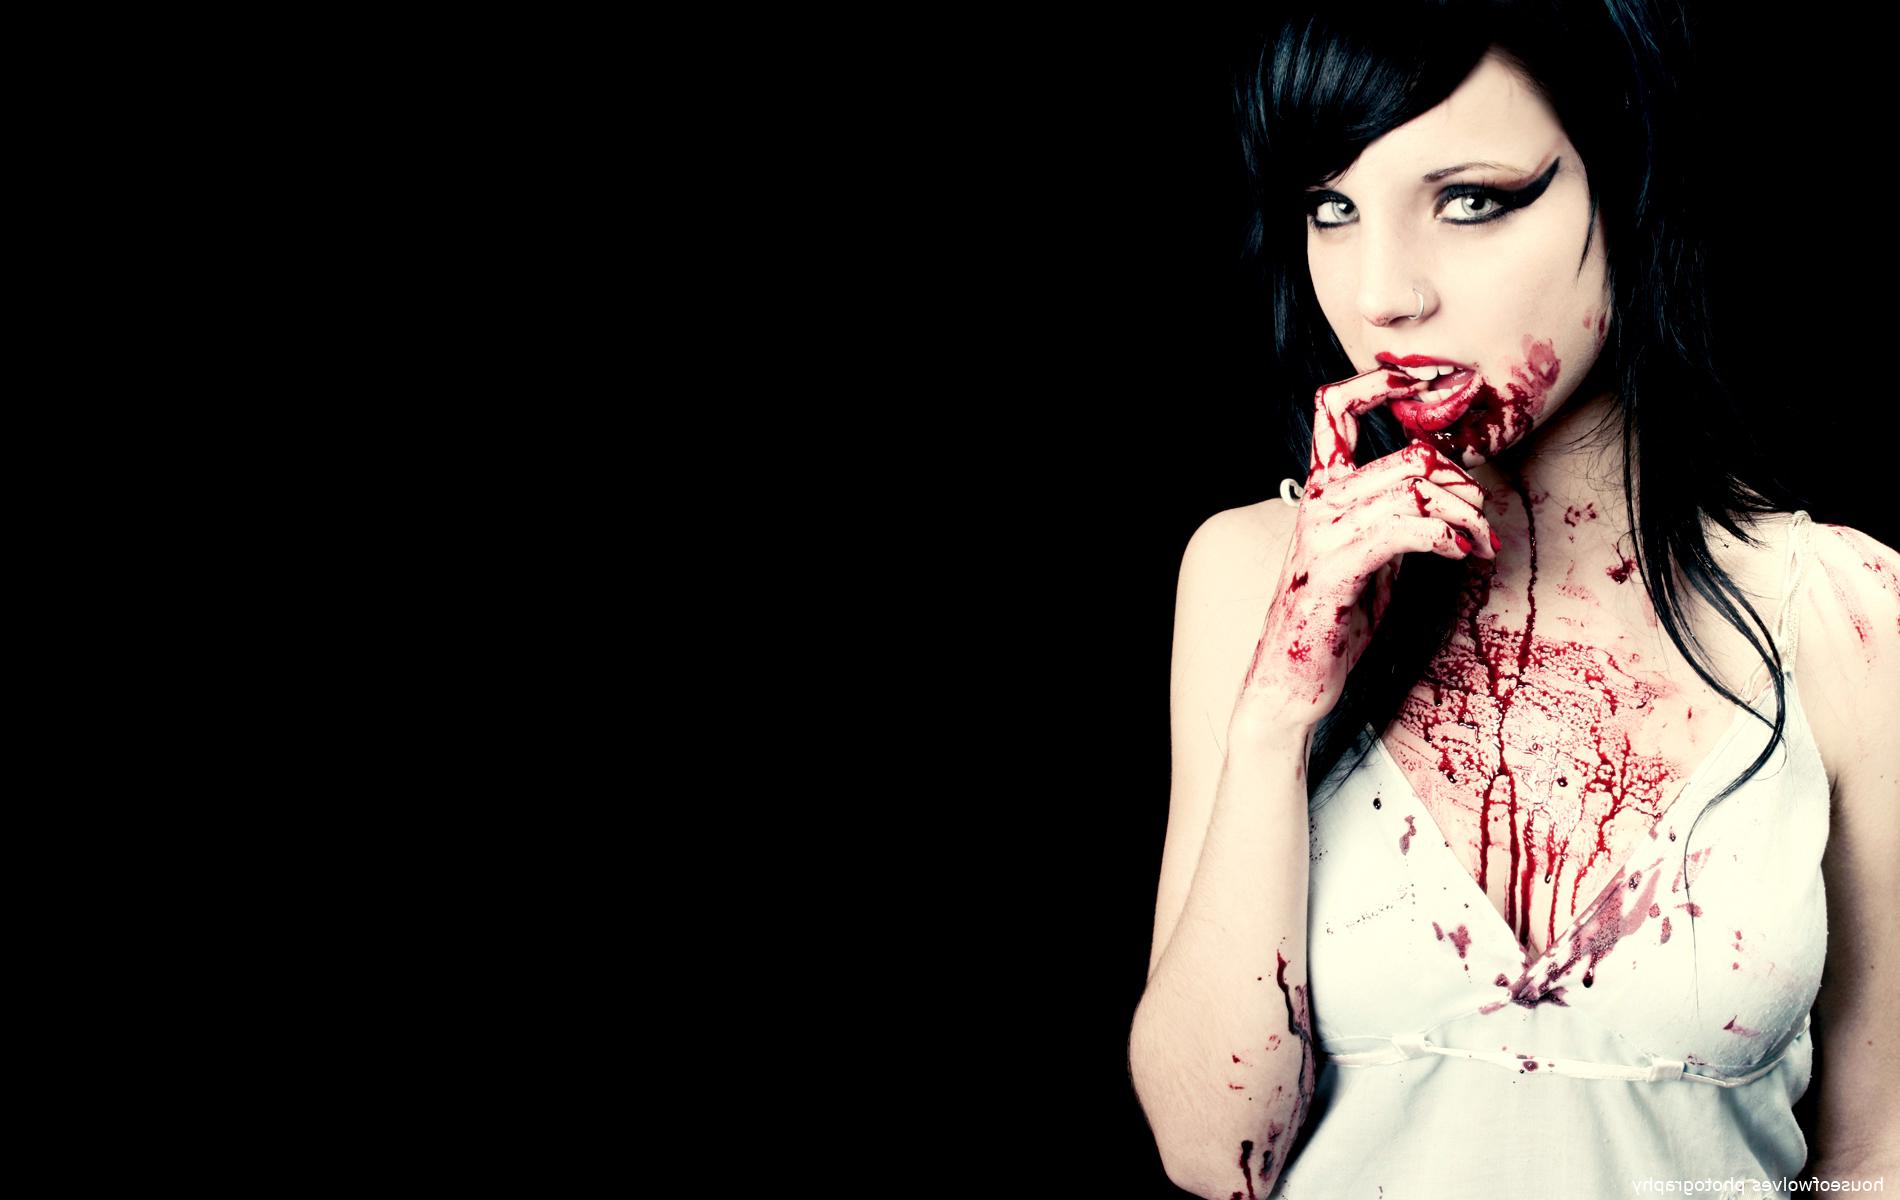 blood, scary, dark, zombie High Definition image